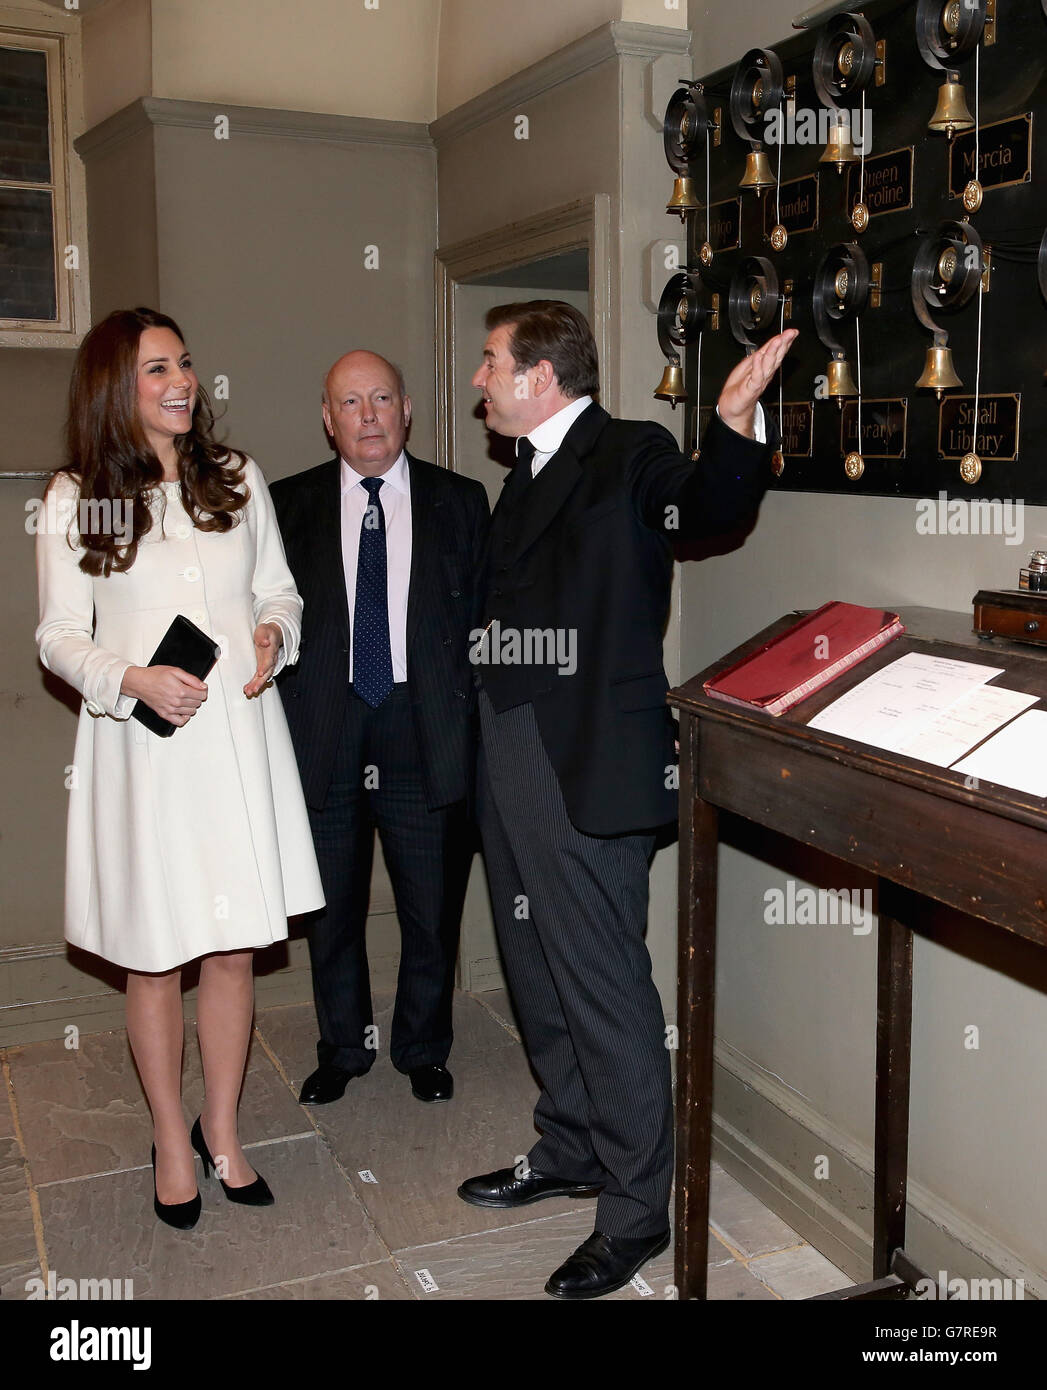 The Duchess of Cambridge is shown the Downton Abbey servants bells by actor Brendan Coyle (John Bates) and Lord Fellowes during an official visit to the set of Downton Abbey at Ealing Studios in London. Stock Photo